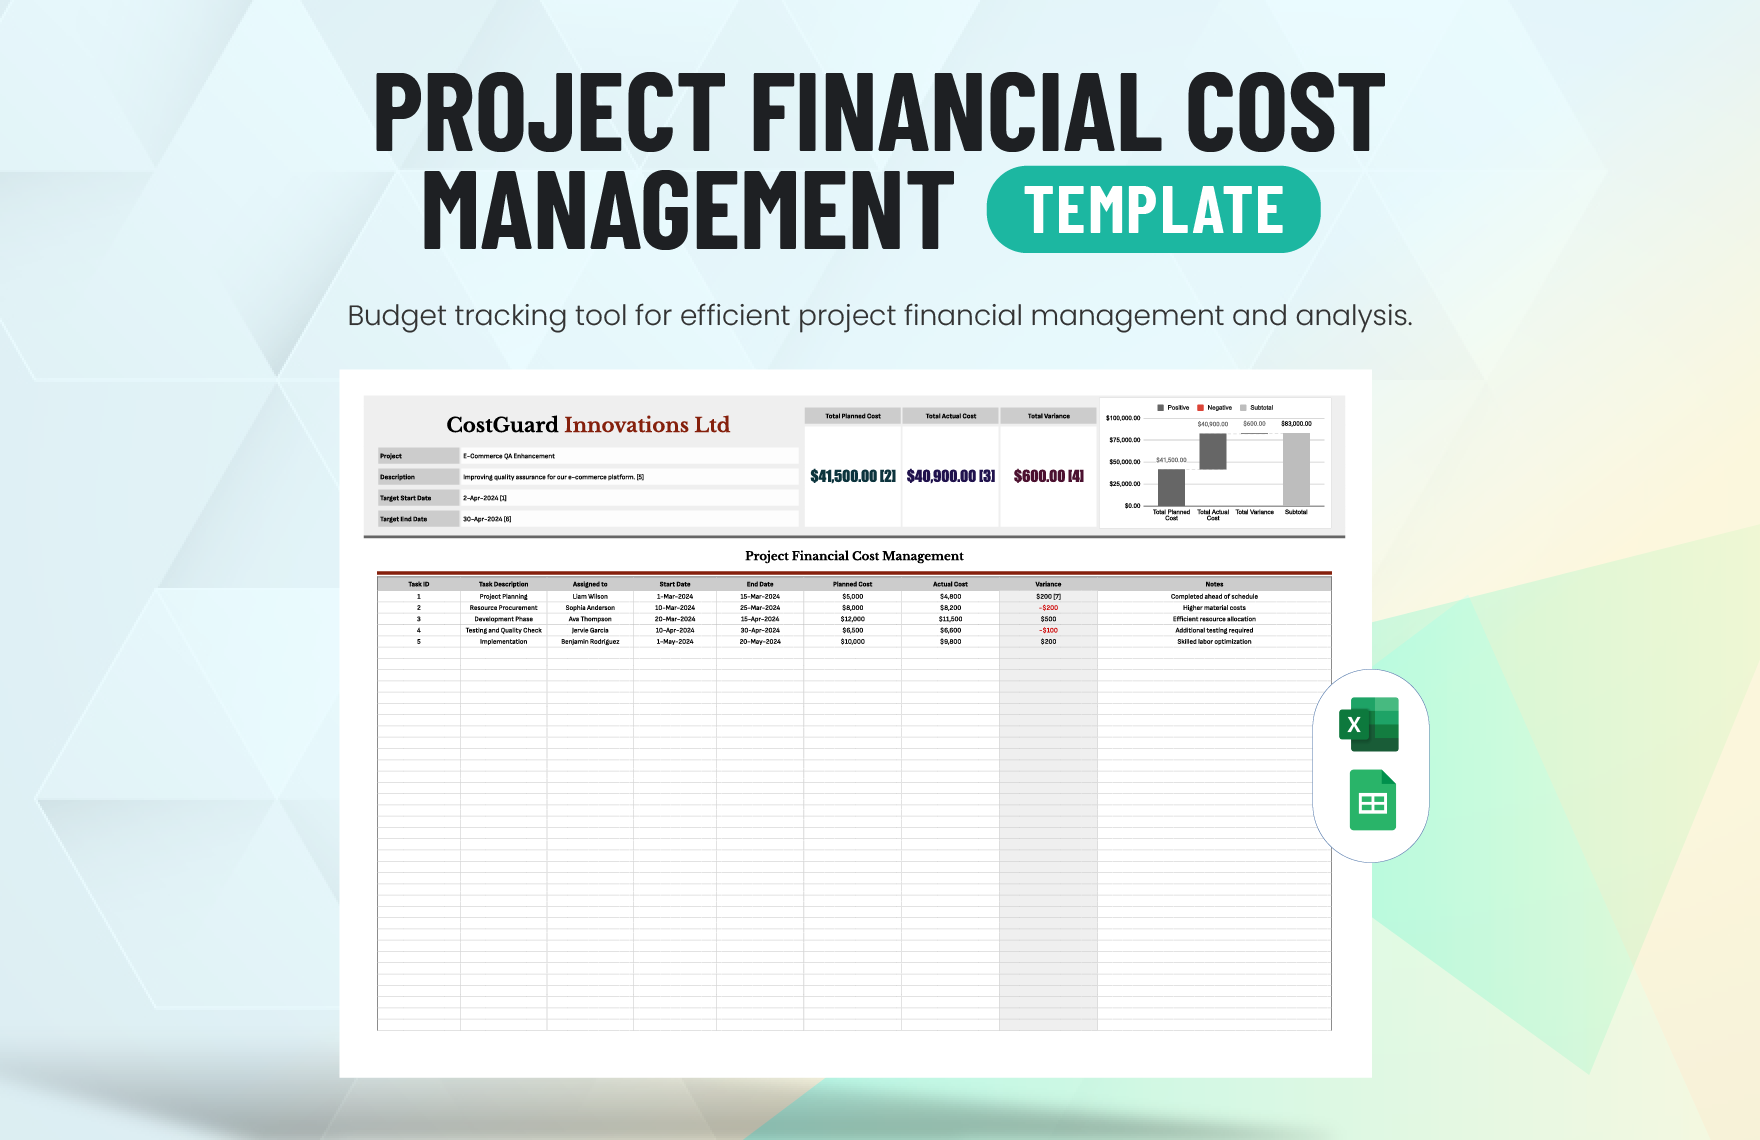 Project Financial Cost Management Template in Excel, Google Sheets